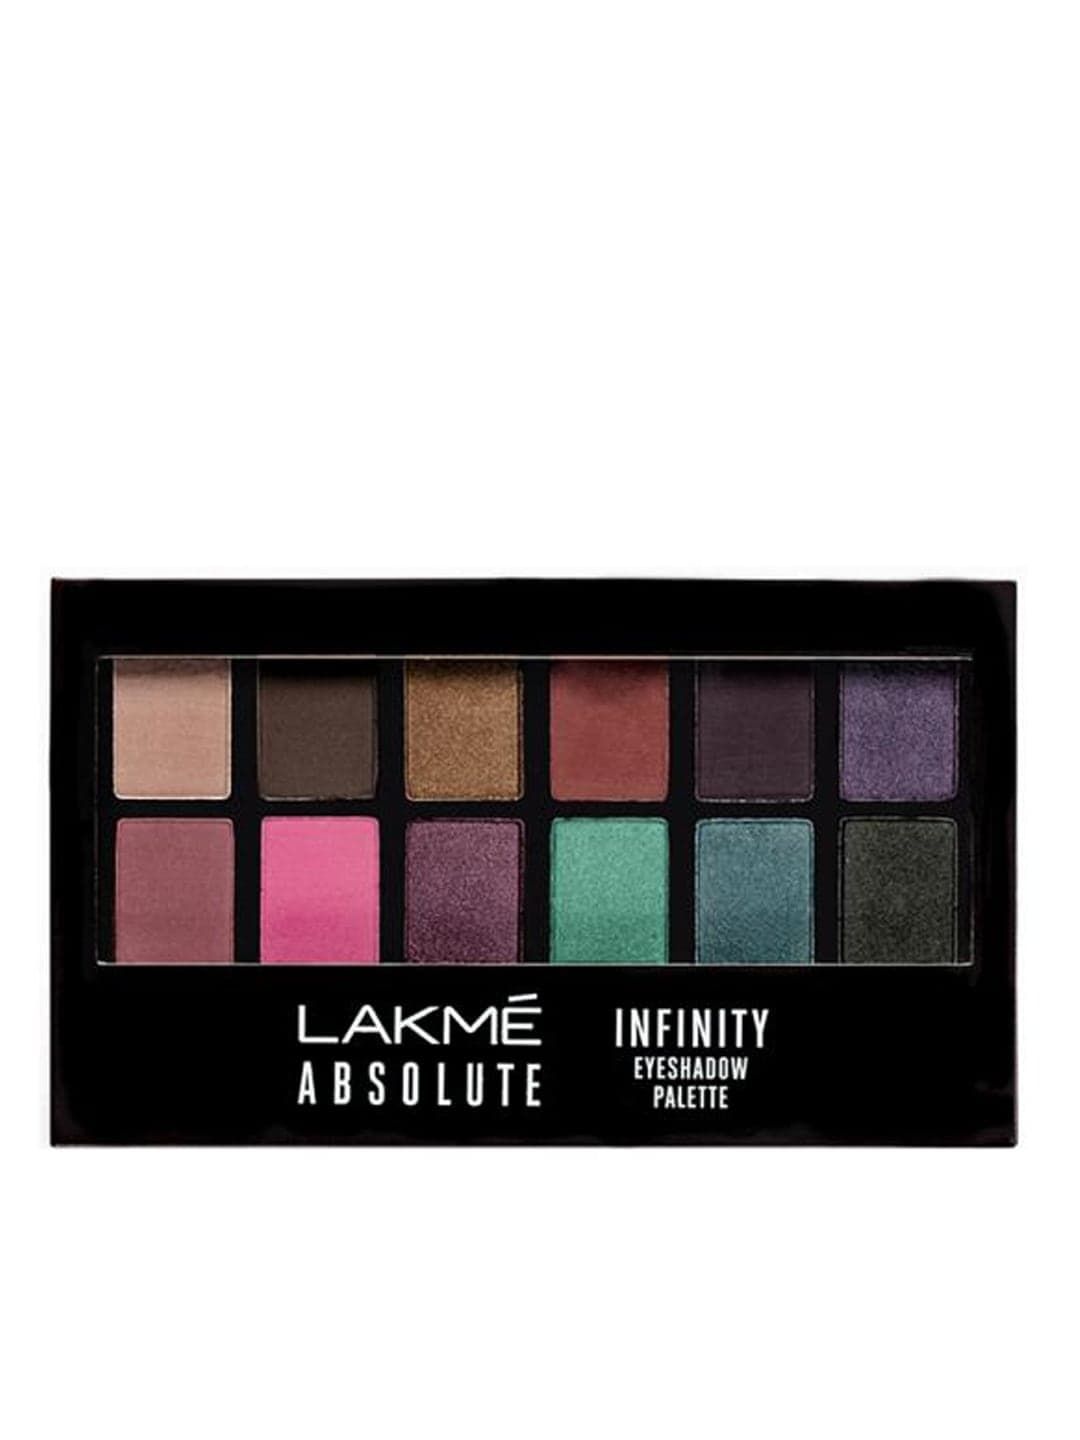 Lakme Absolute Infinity Eye Shadow Palette - Midnight Magic Price in India